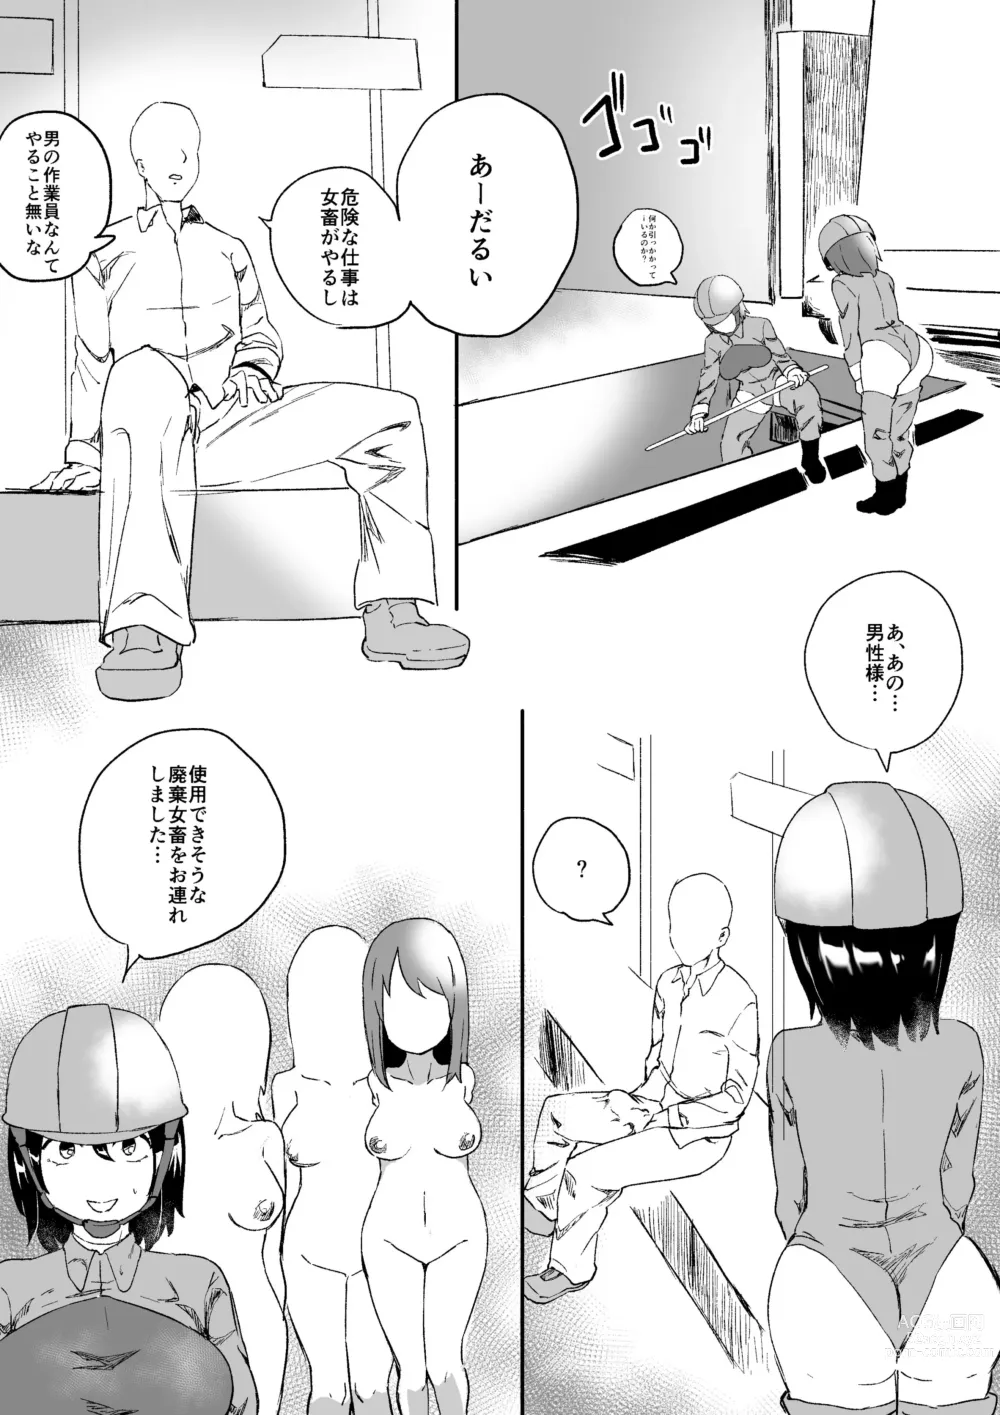 Page 15 of doujinshi Red Tag Episode 9